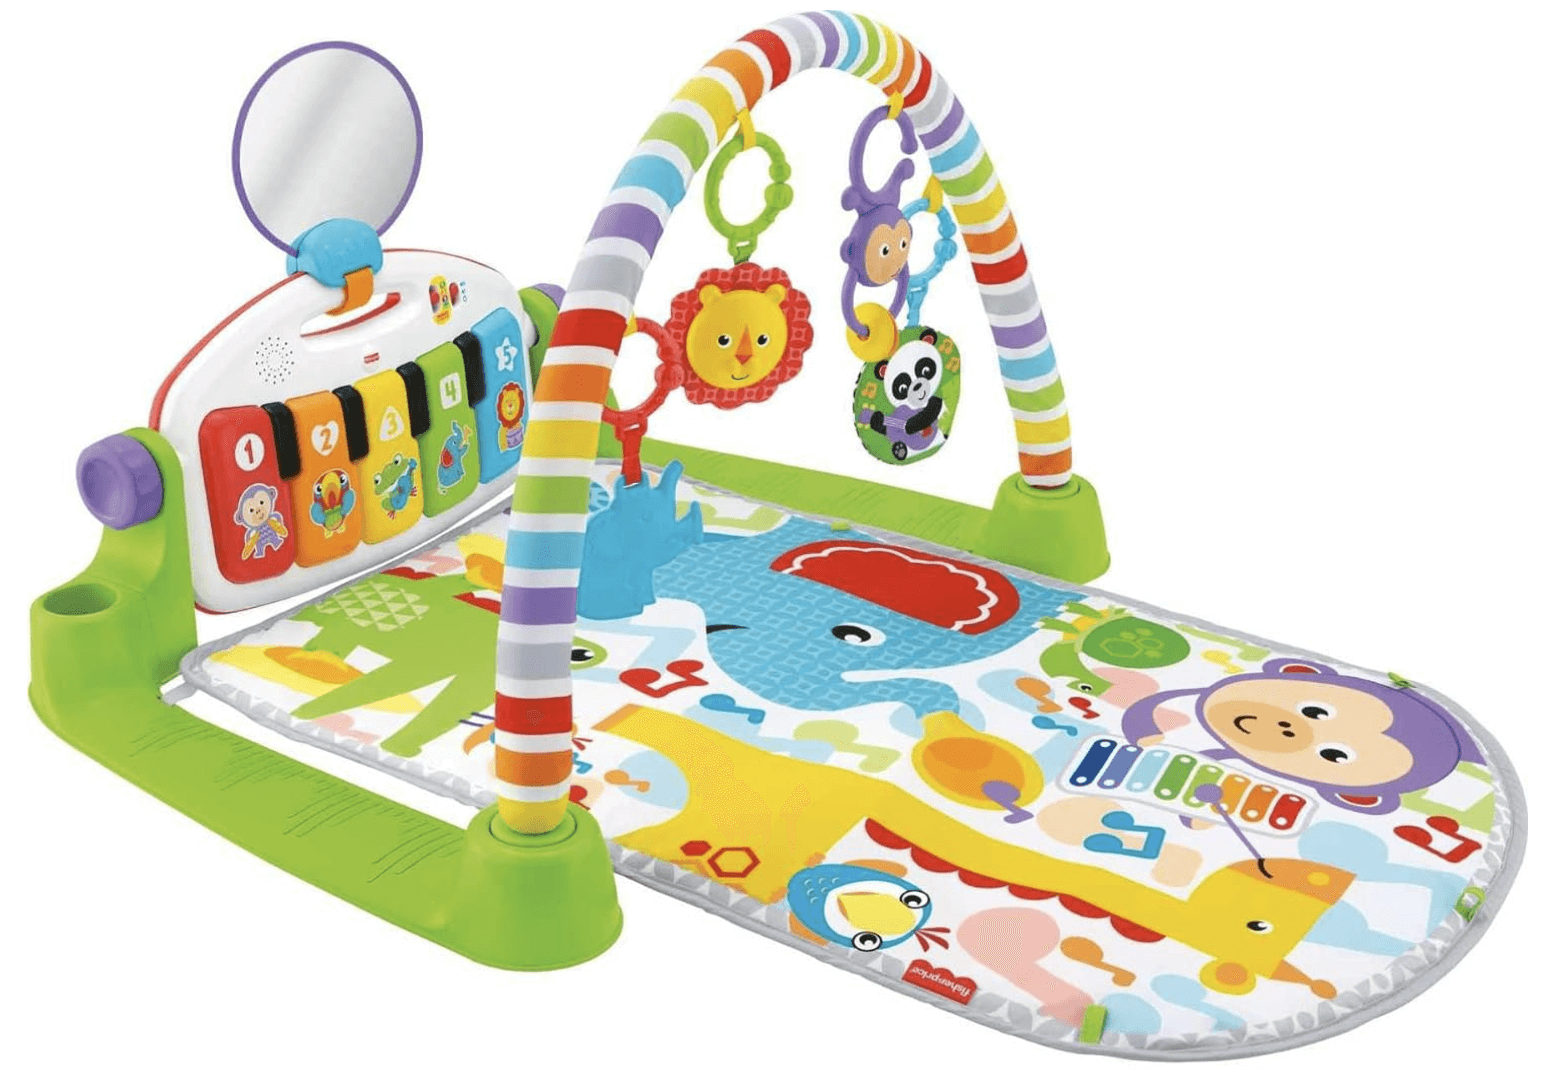 Fisher-Price Baby Deluxe Kick and Play Piano Gym Musical Playmat (Green or Pink) $30 + Free Shipping